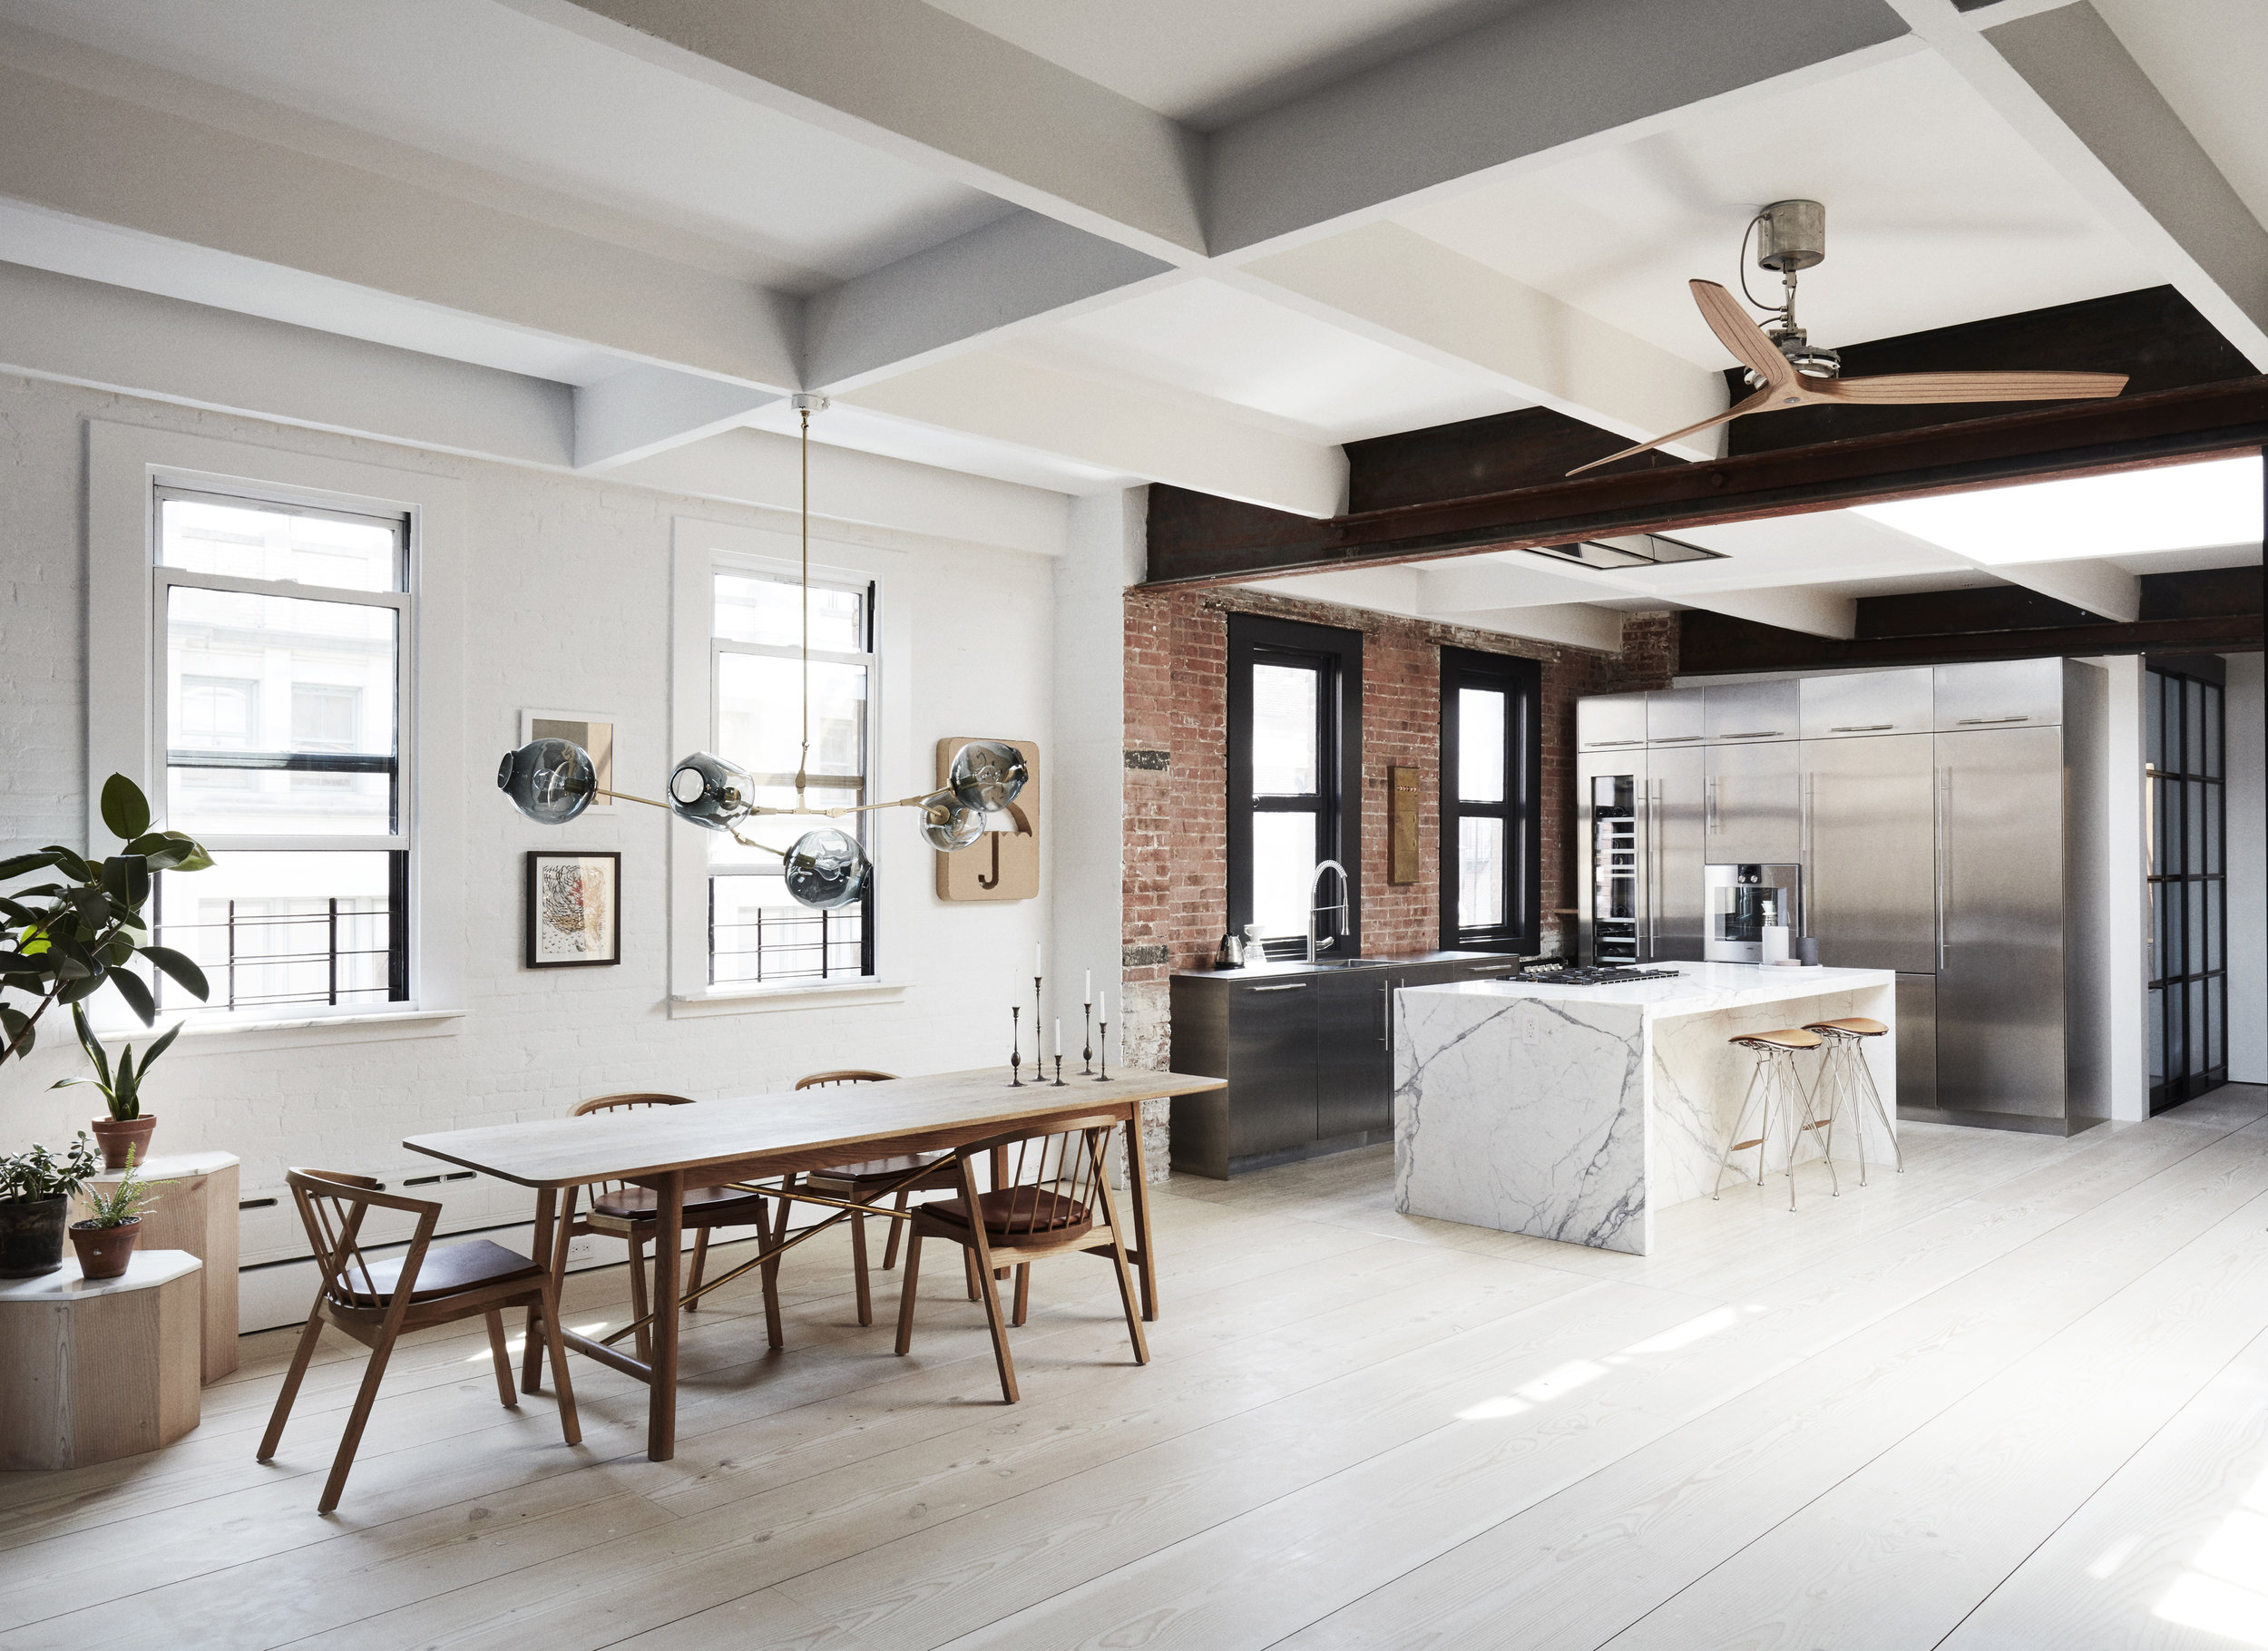 Interior Inspirations: Un loft industriale a New York – In the mood for ...